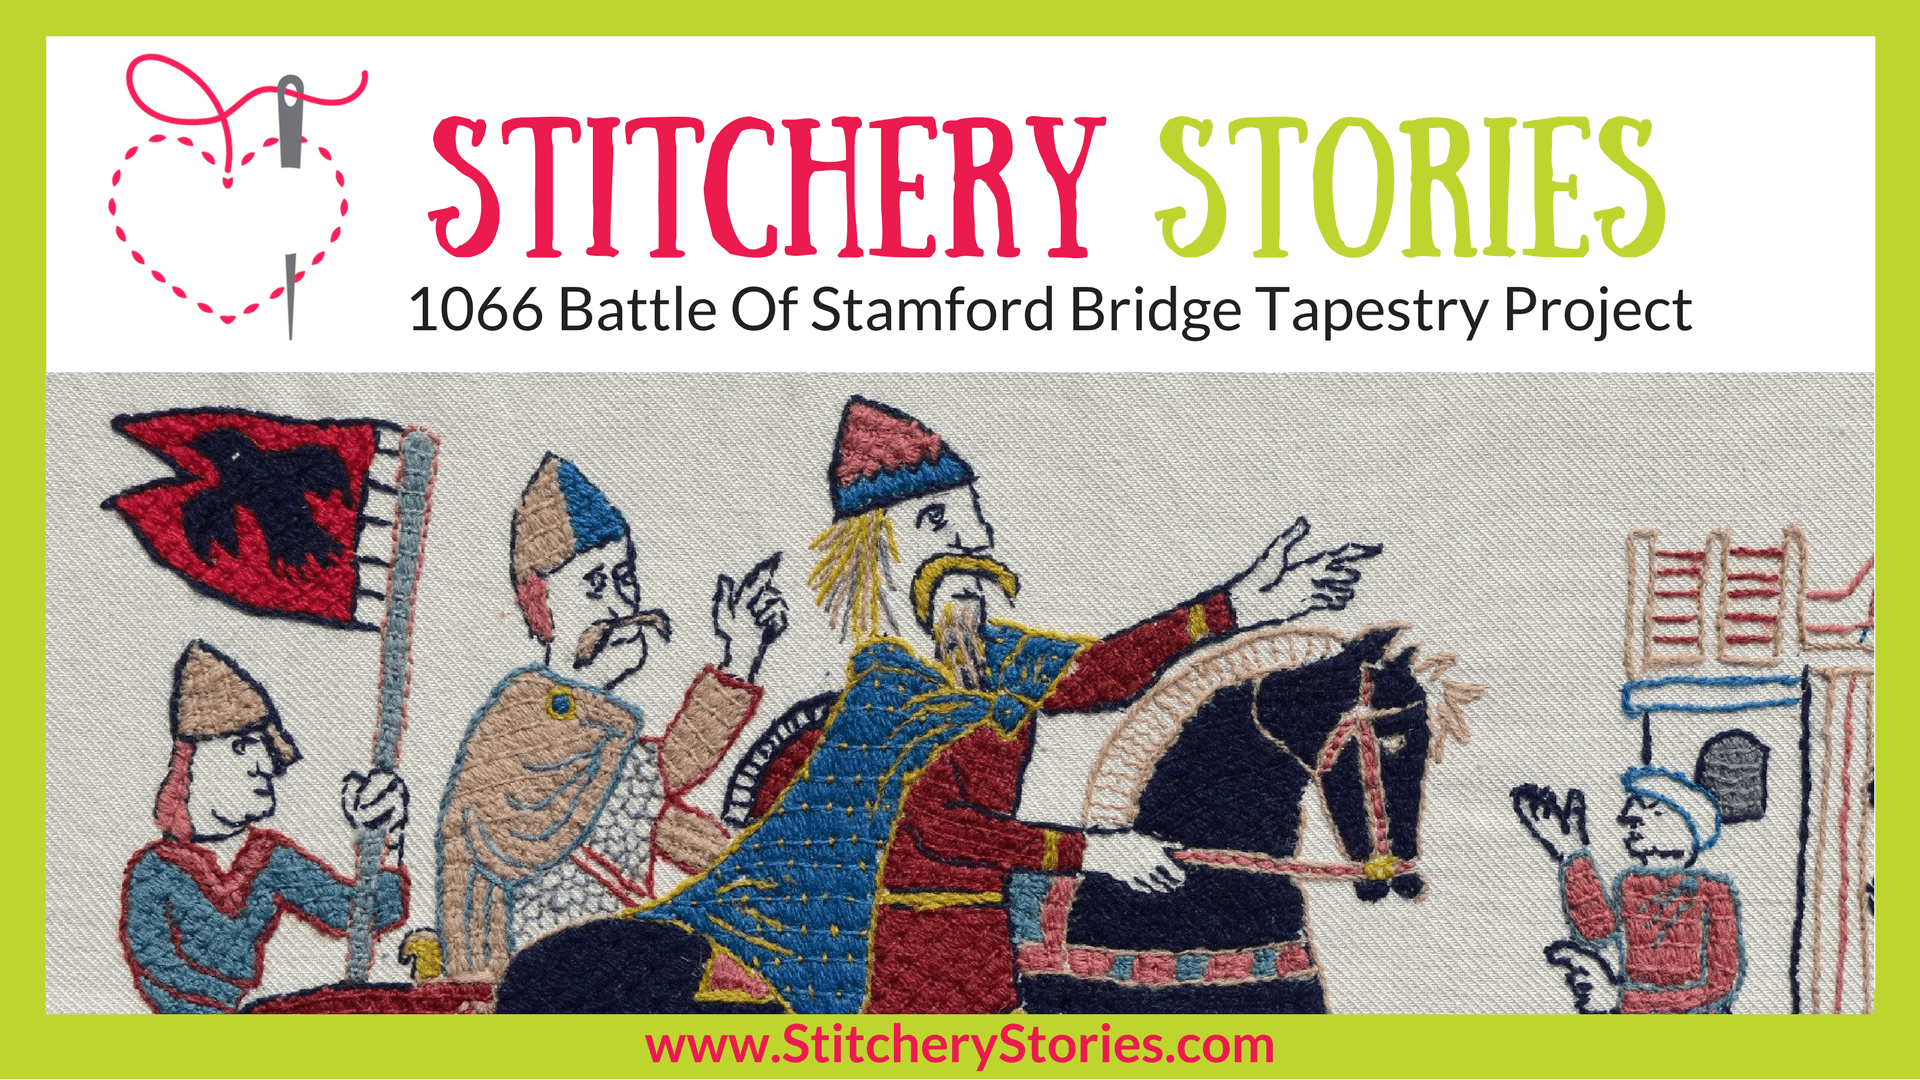 Battle Of Stamford Bridge Tapestry Project Stitchery Stories Podcast Guest